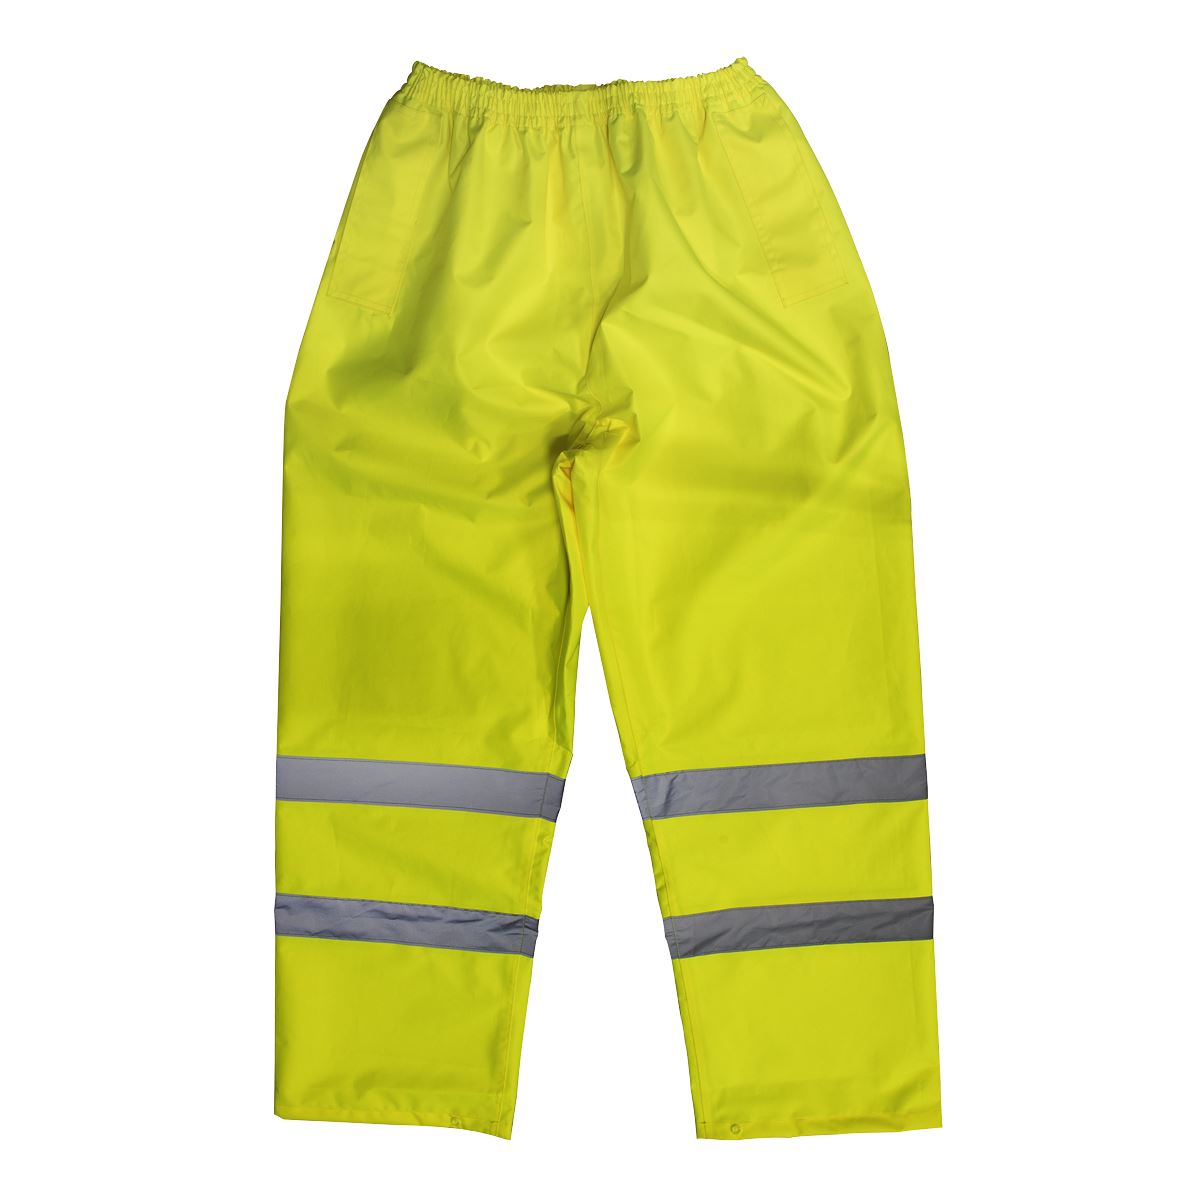 Worksafe by Sealey Hi-Vis Yellow Waterproof Trousers - X-Large